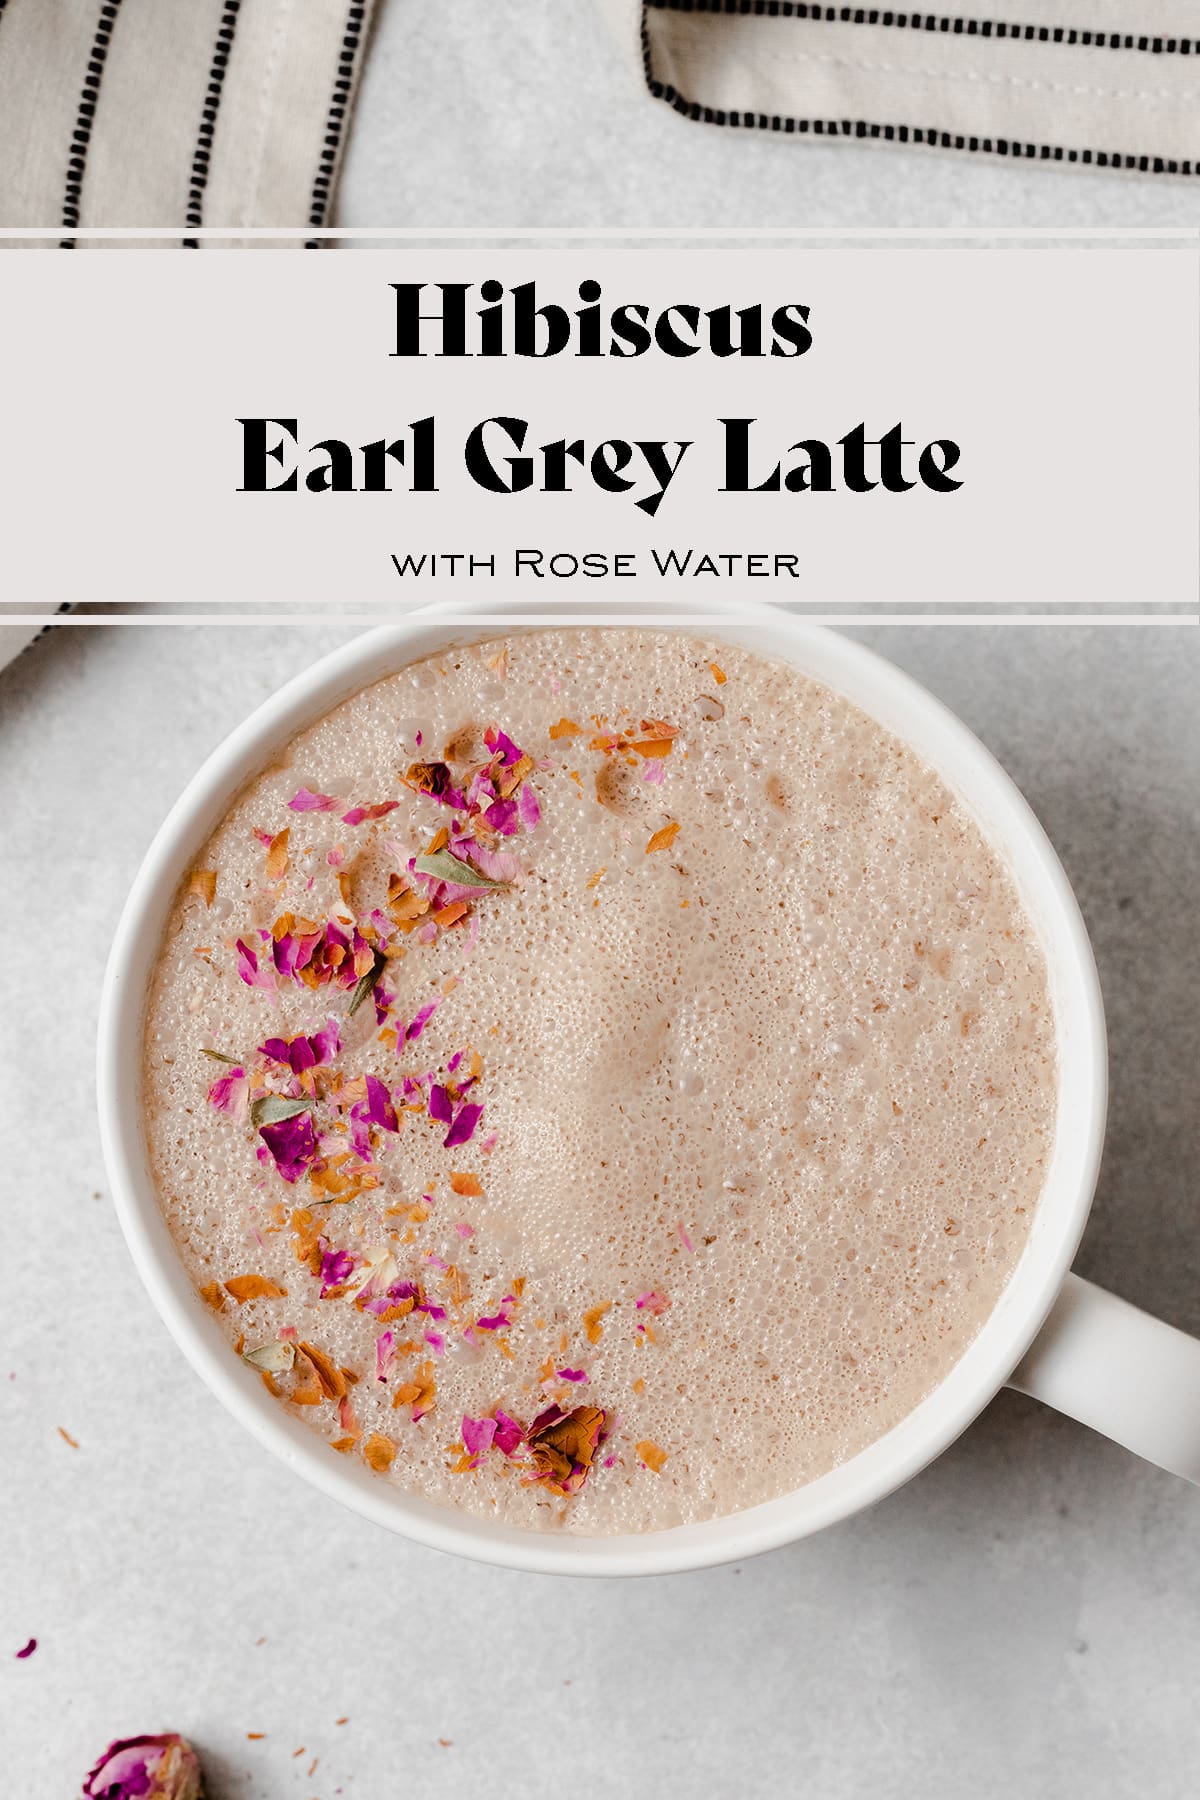 Hibiscus Earl Grey Latte with Rose Water